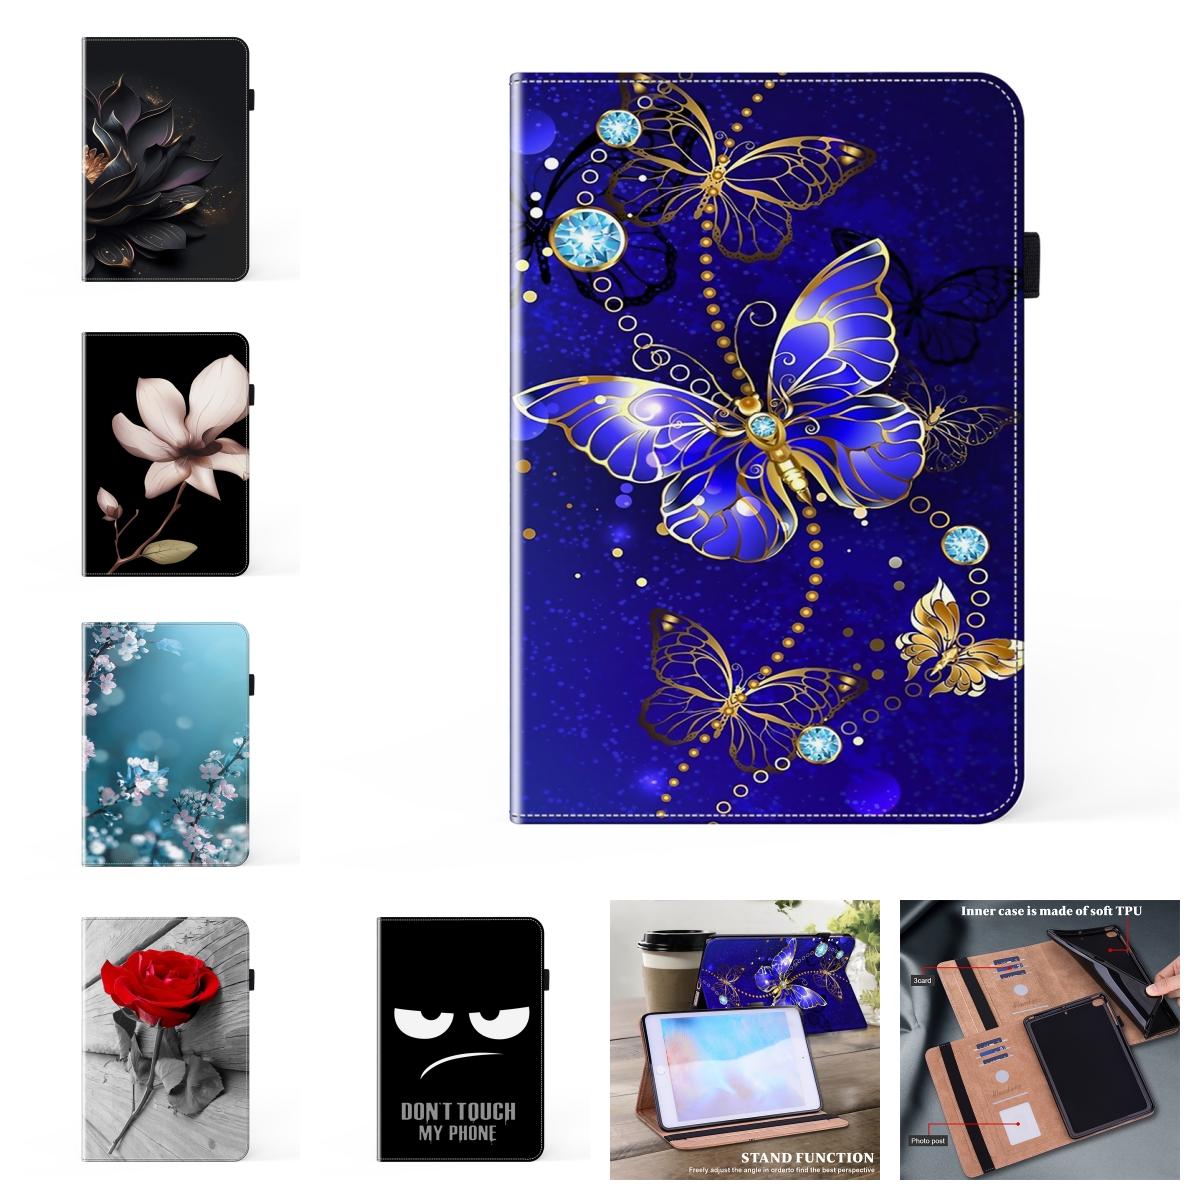 HPT-MCZ For Samsung Galaxy Tab S7,S8,S9,Tab A7,Tab S7 FE,Tab S6 Lite,Tab S2,Tab A 8.0,S5e,Tab A 10.1...Premium Luxury Leather Paintings Pattern Tablets Case